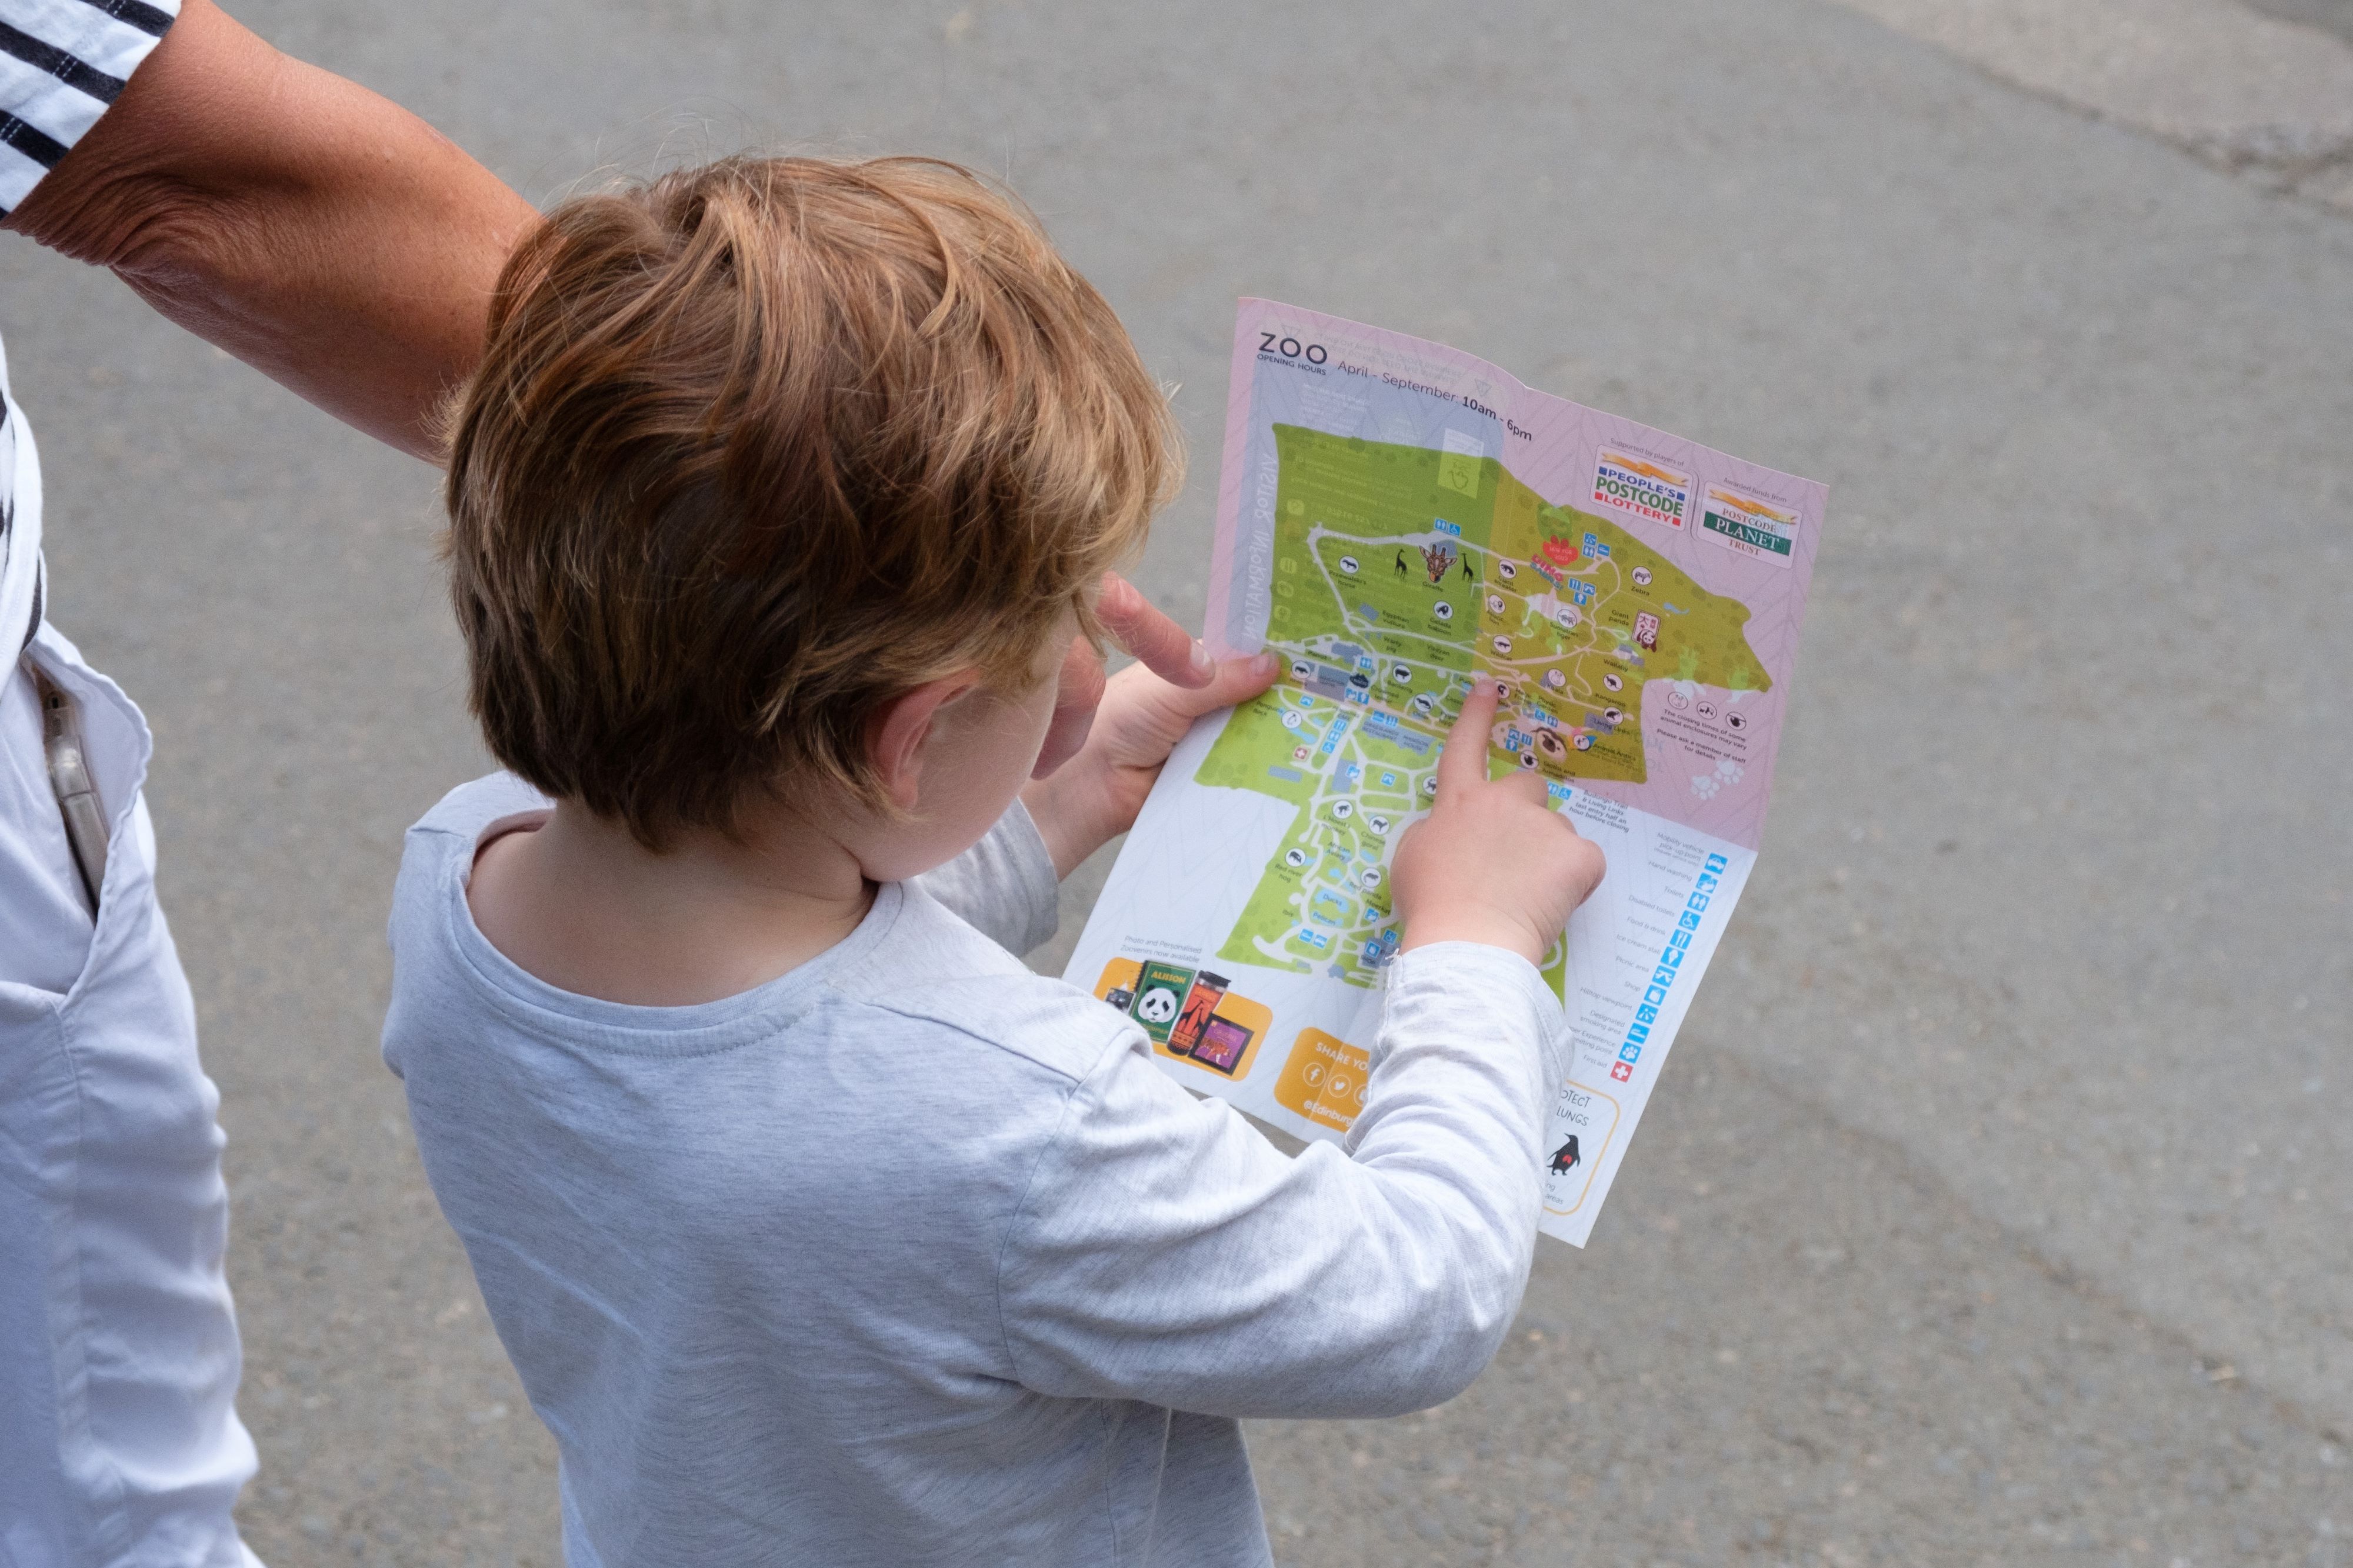 Keeper experiences young boy looking at map and pointing IMAGE: Robin Mair 2024